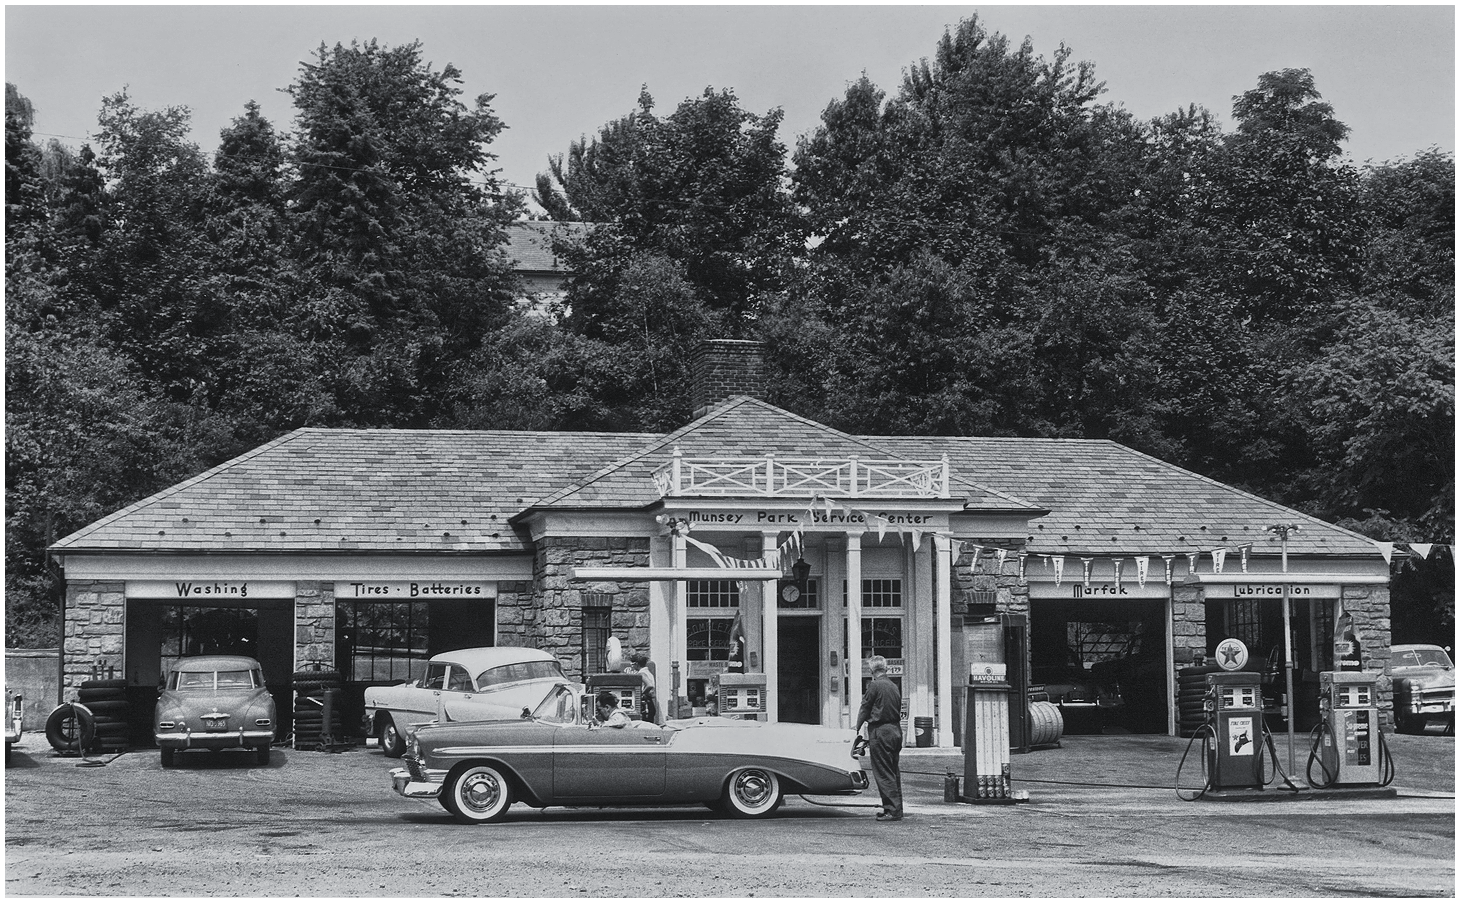 full-service0-gas0station0-1950s-inkbluesky.png